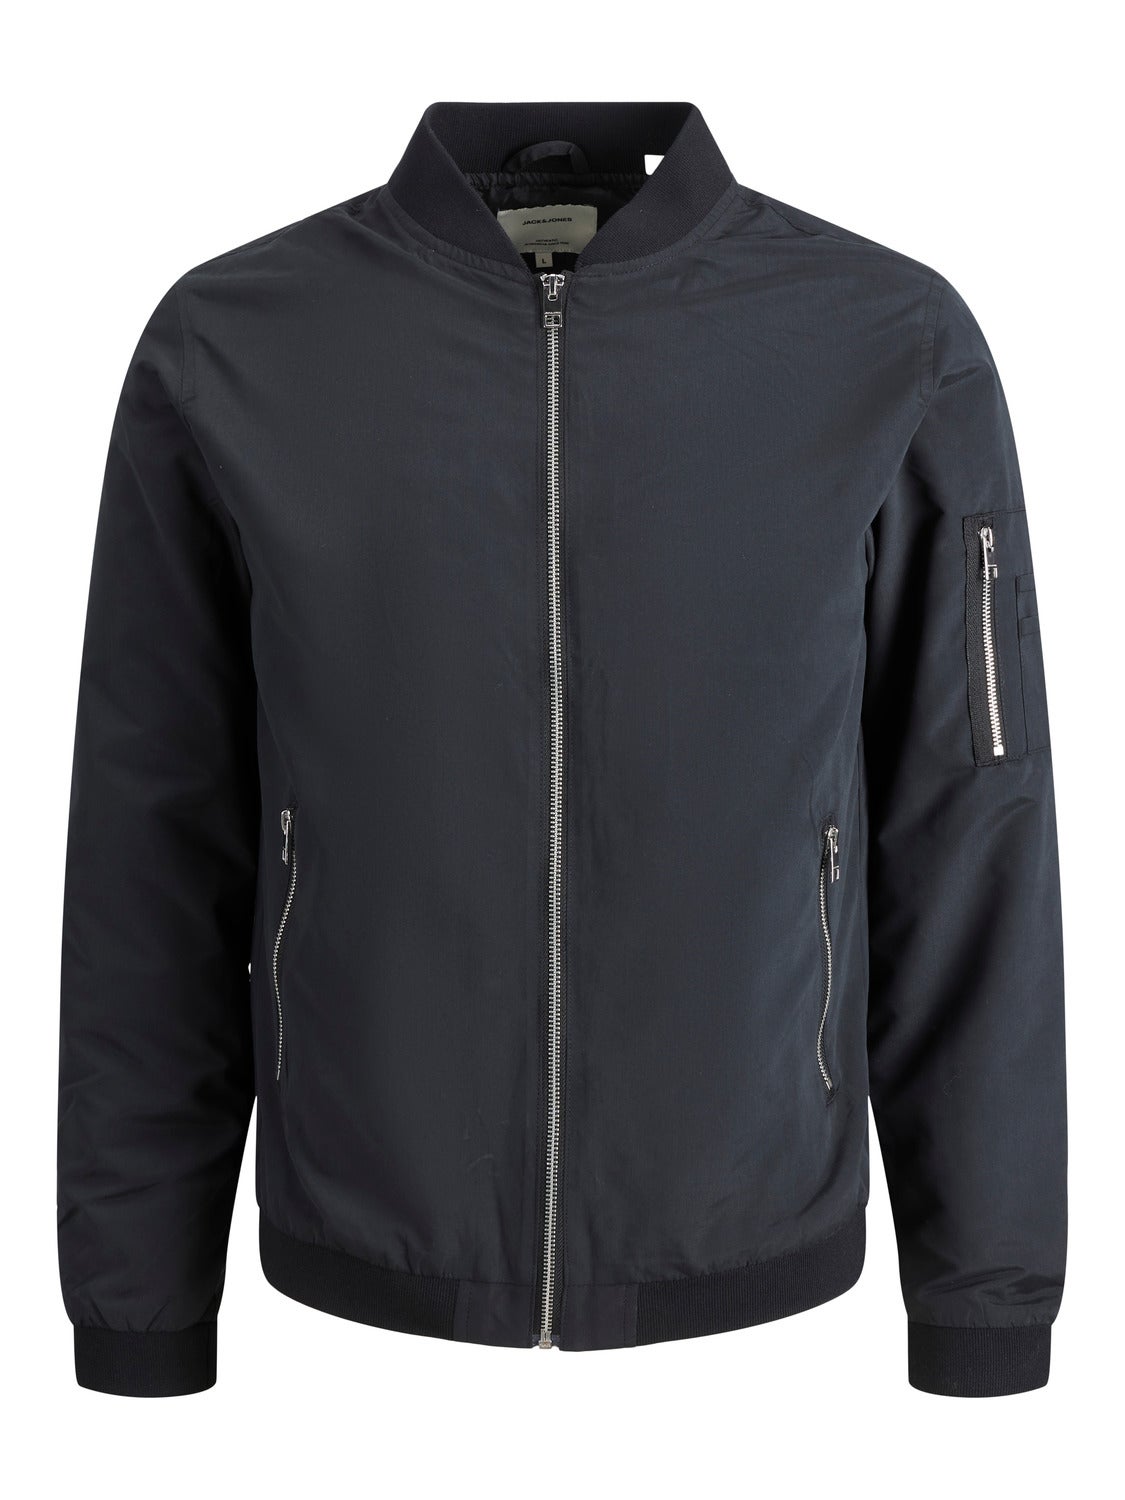 JACK & JONES Seude Jacket at Rs 2899/piece | Promotional T Shirts in  Bengaluru | ID: 2852860845991